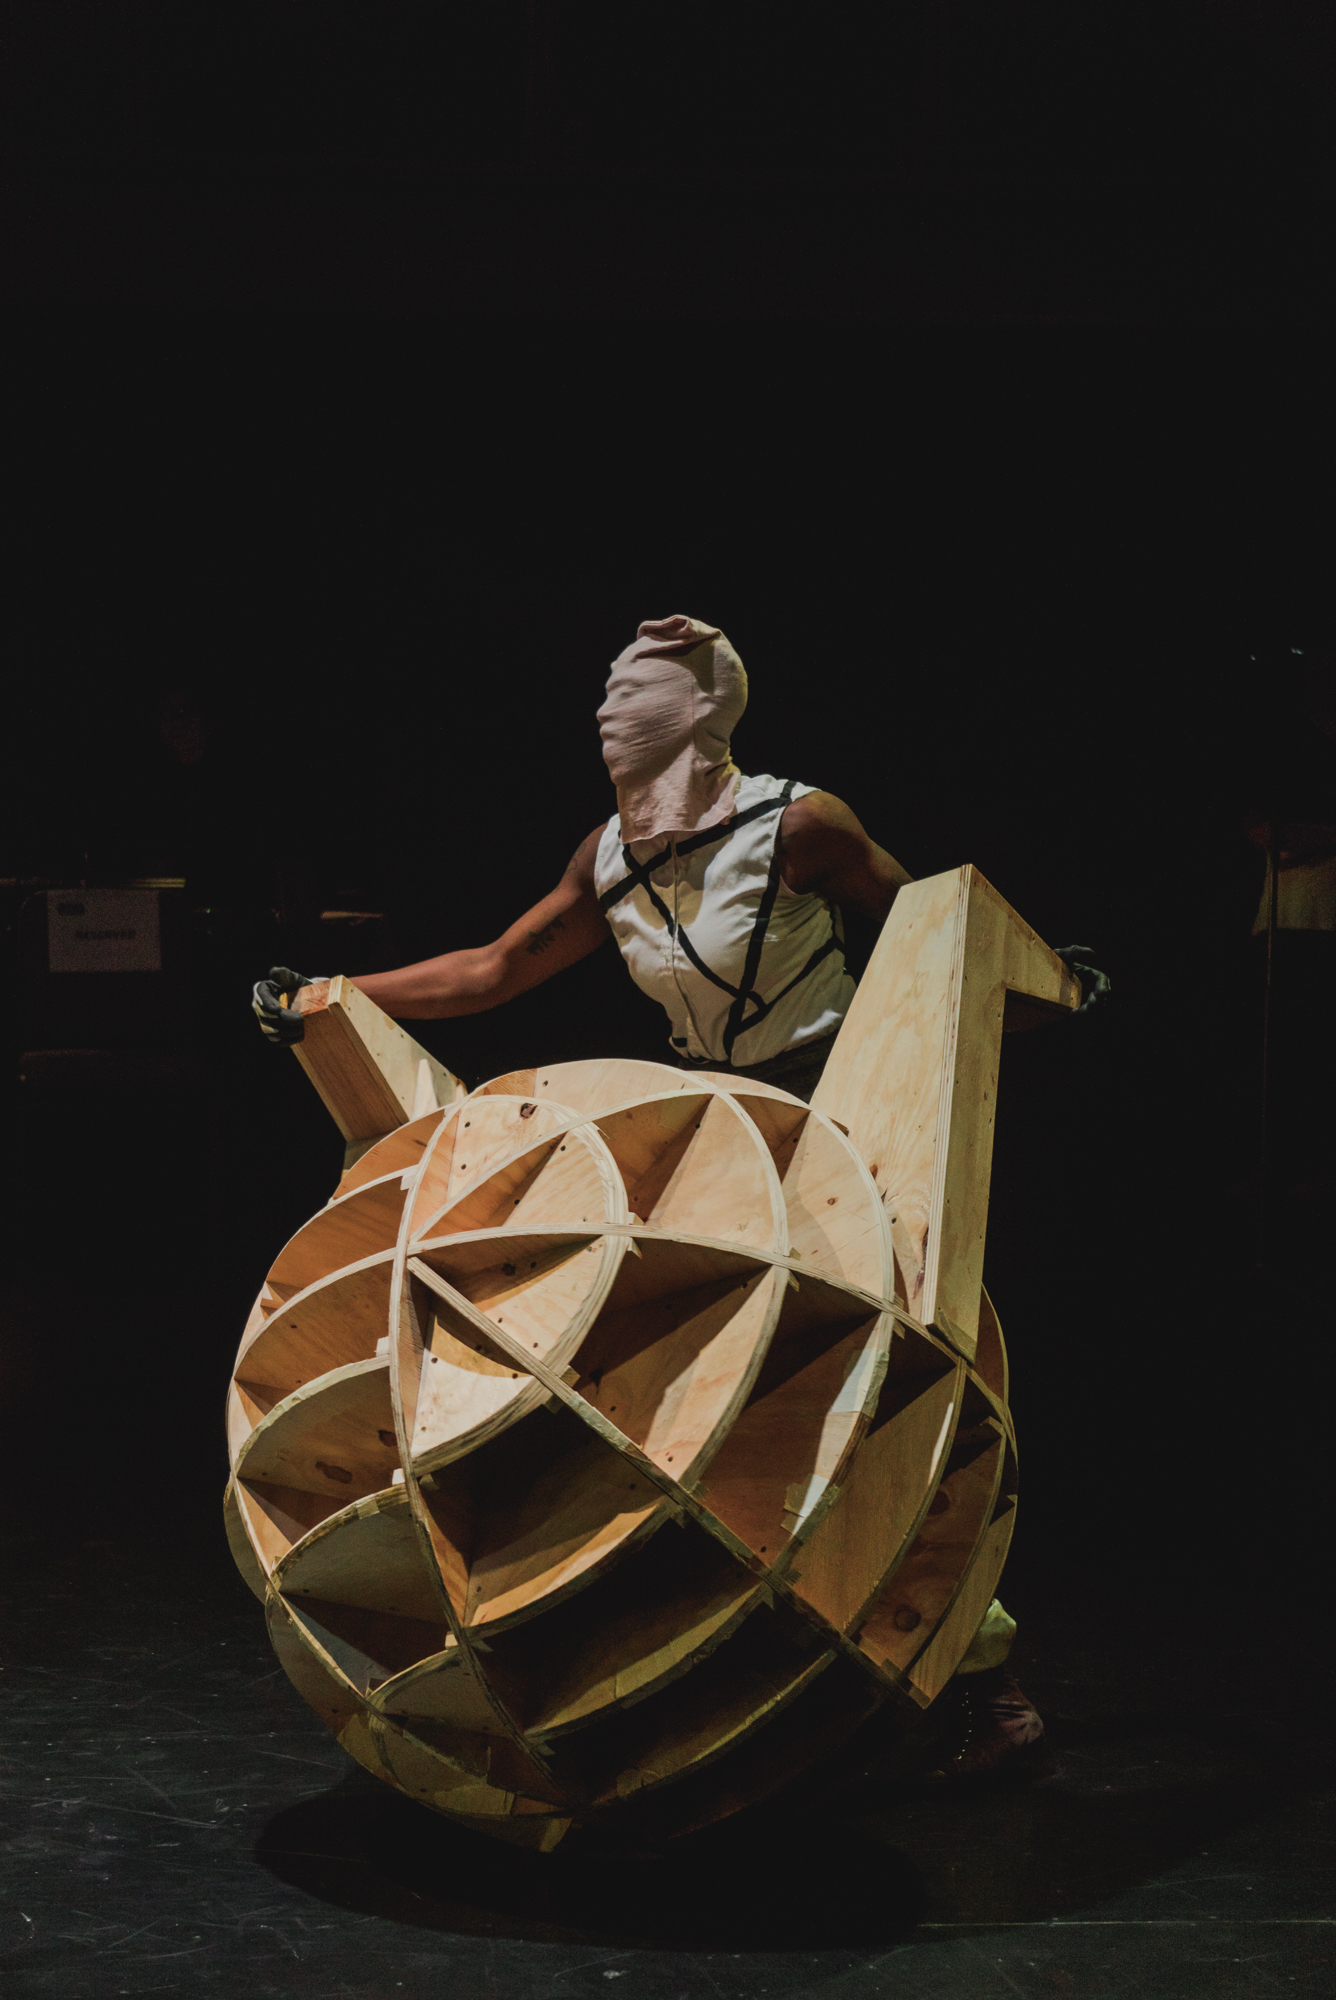 A performer with the Commons Choir stands masked behind a large spherical wooden construction